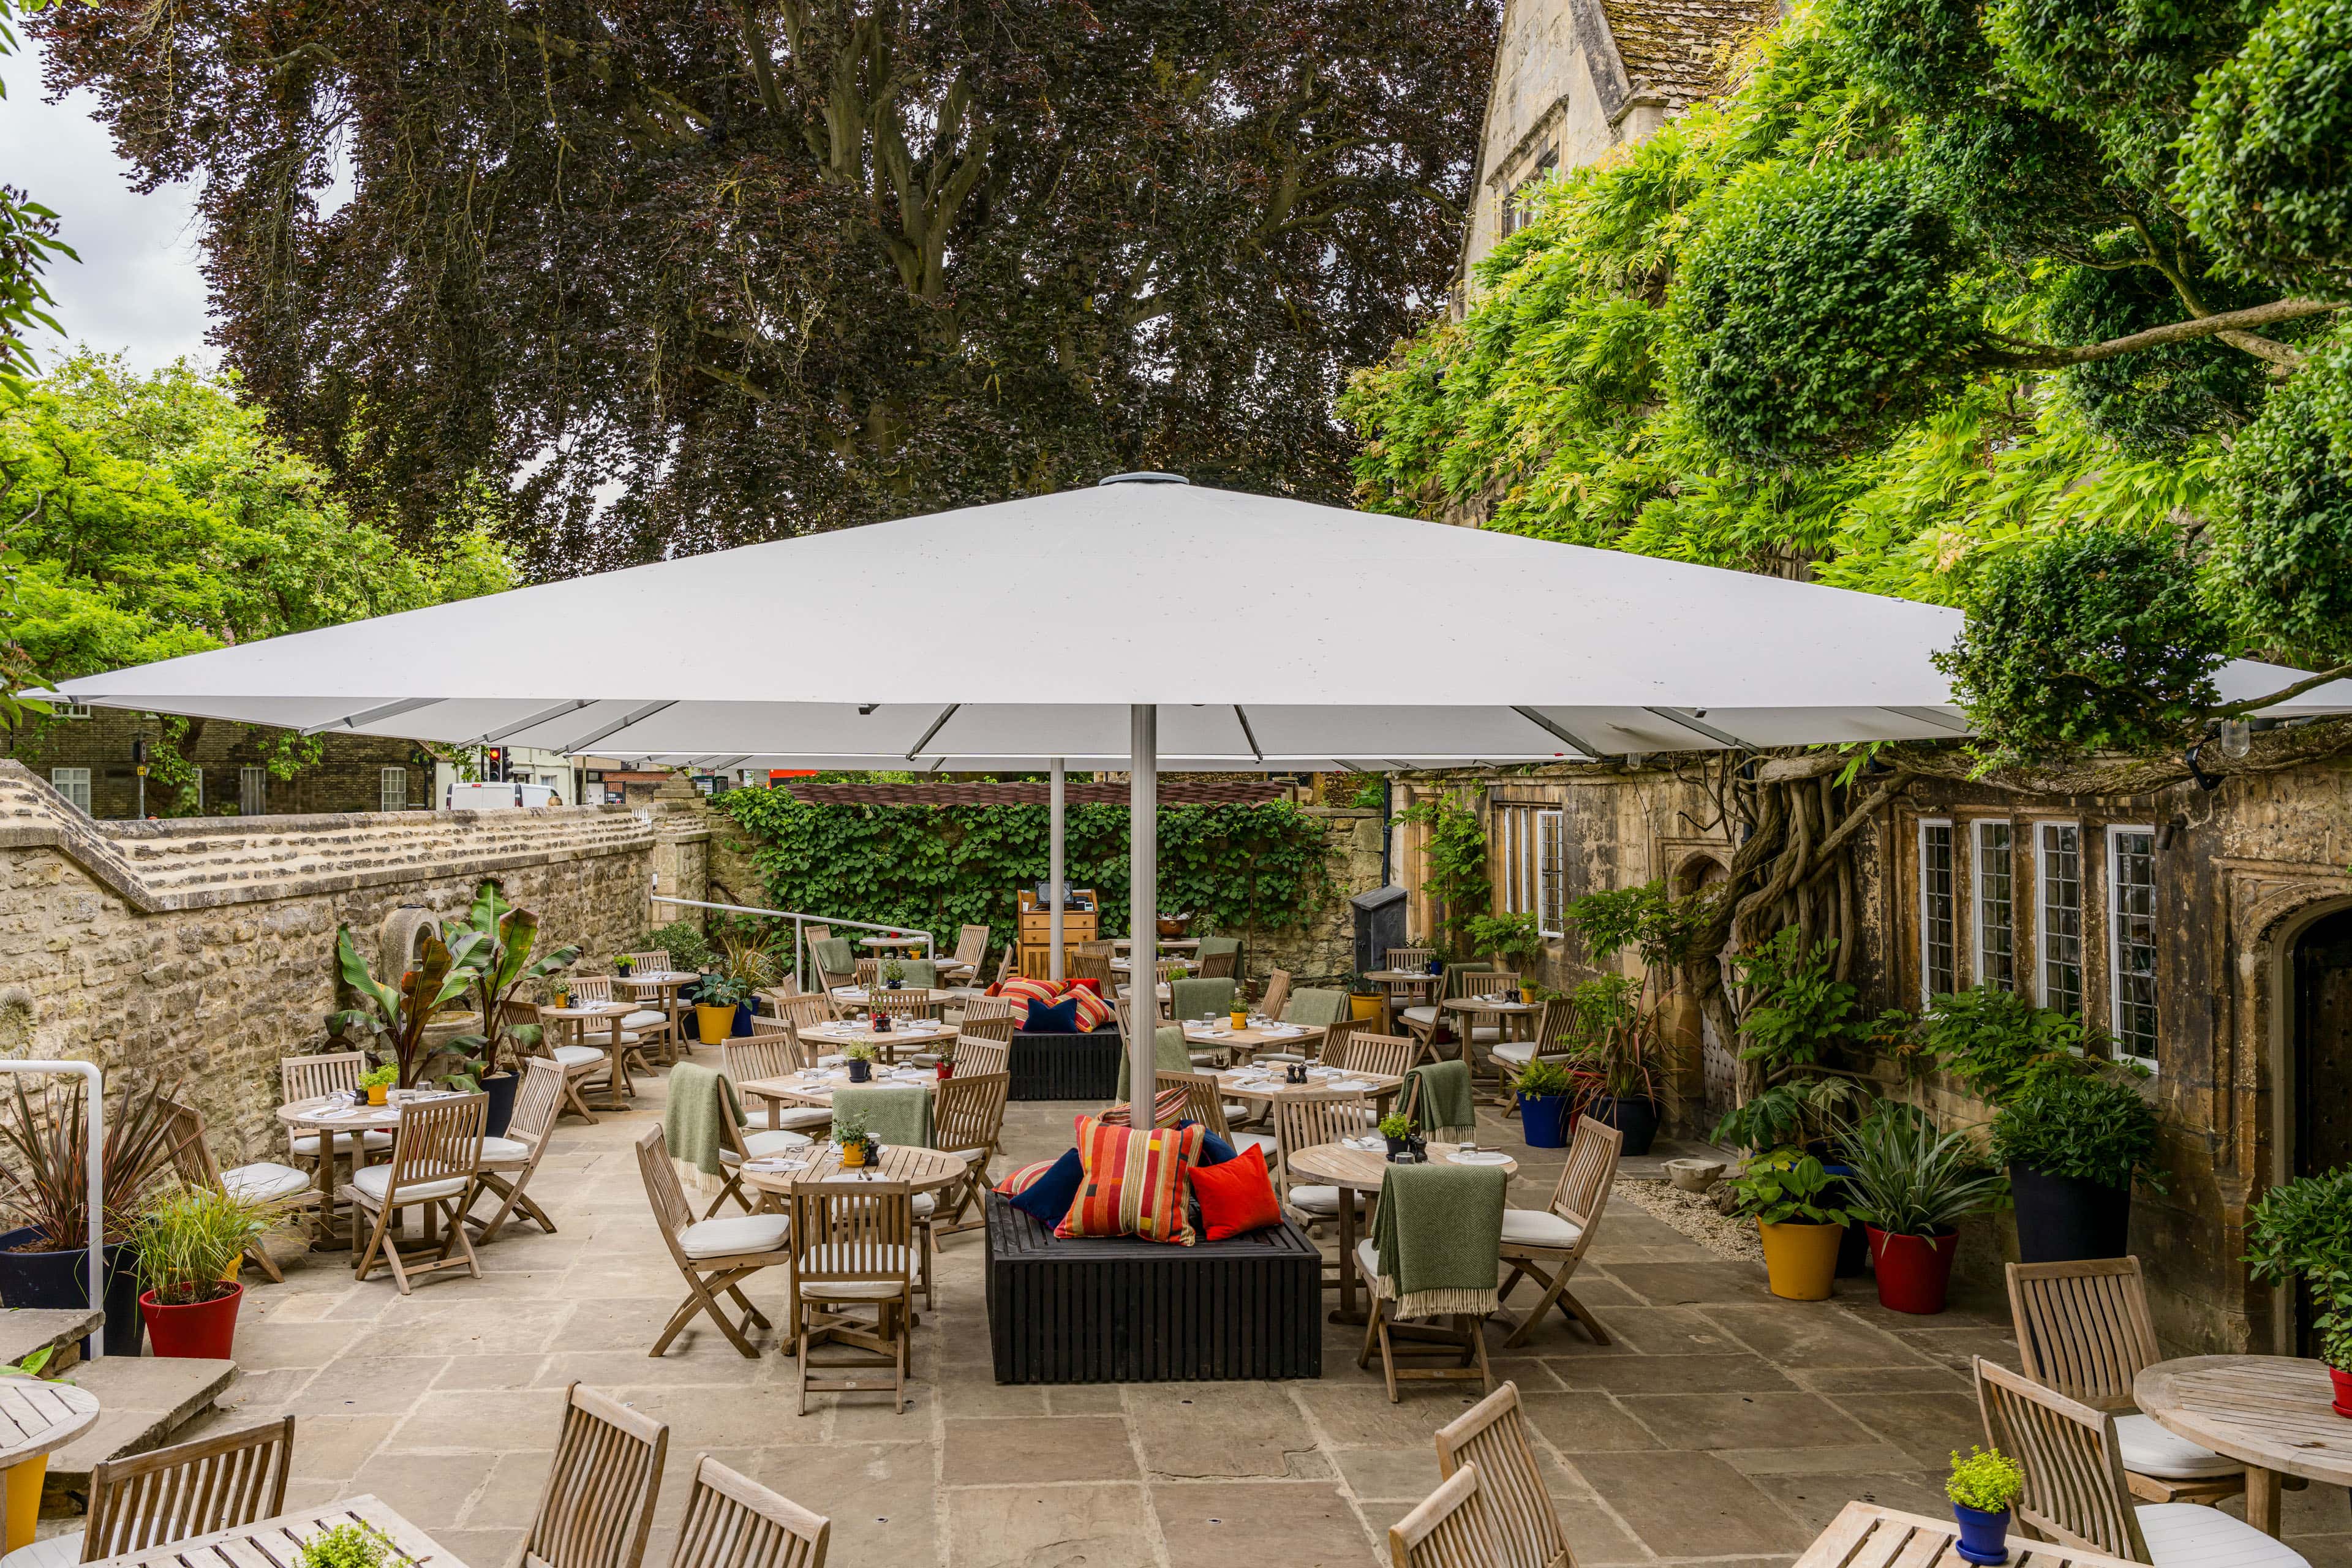 A7R03754 - 2024 - Parsonage Grill - Oxford - High Res - Outdoor Terrace Seating - Web Hero